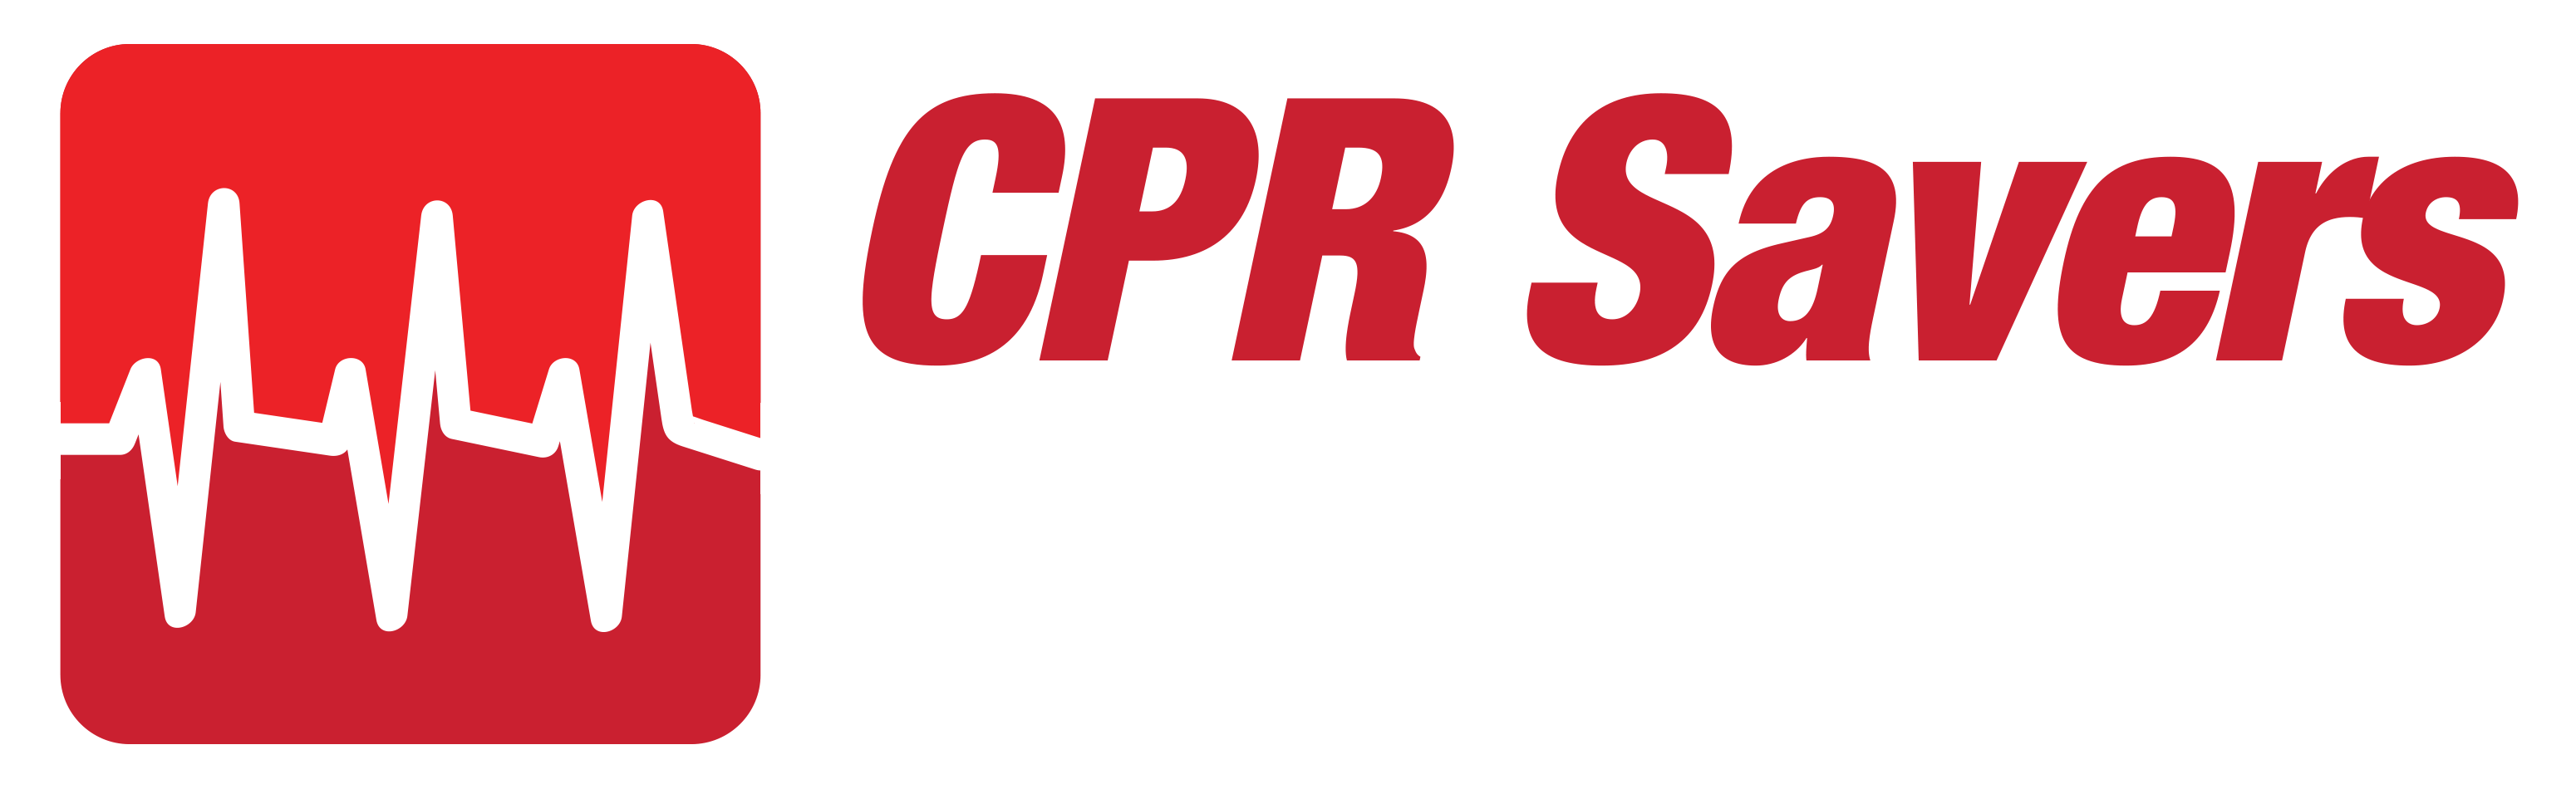 Cpr Training PNG - 133579